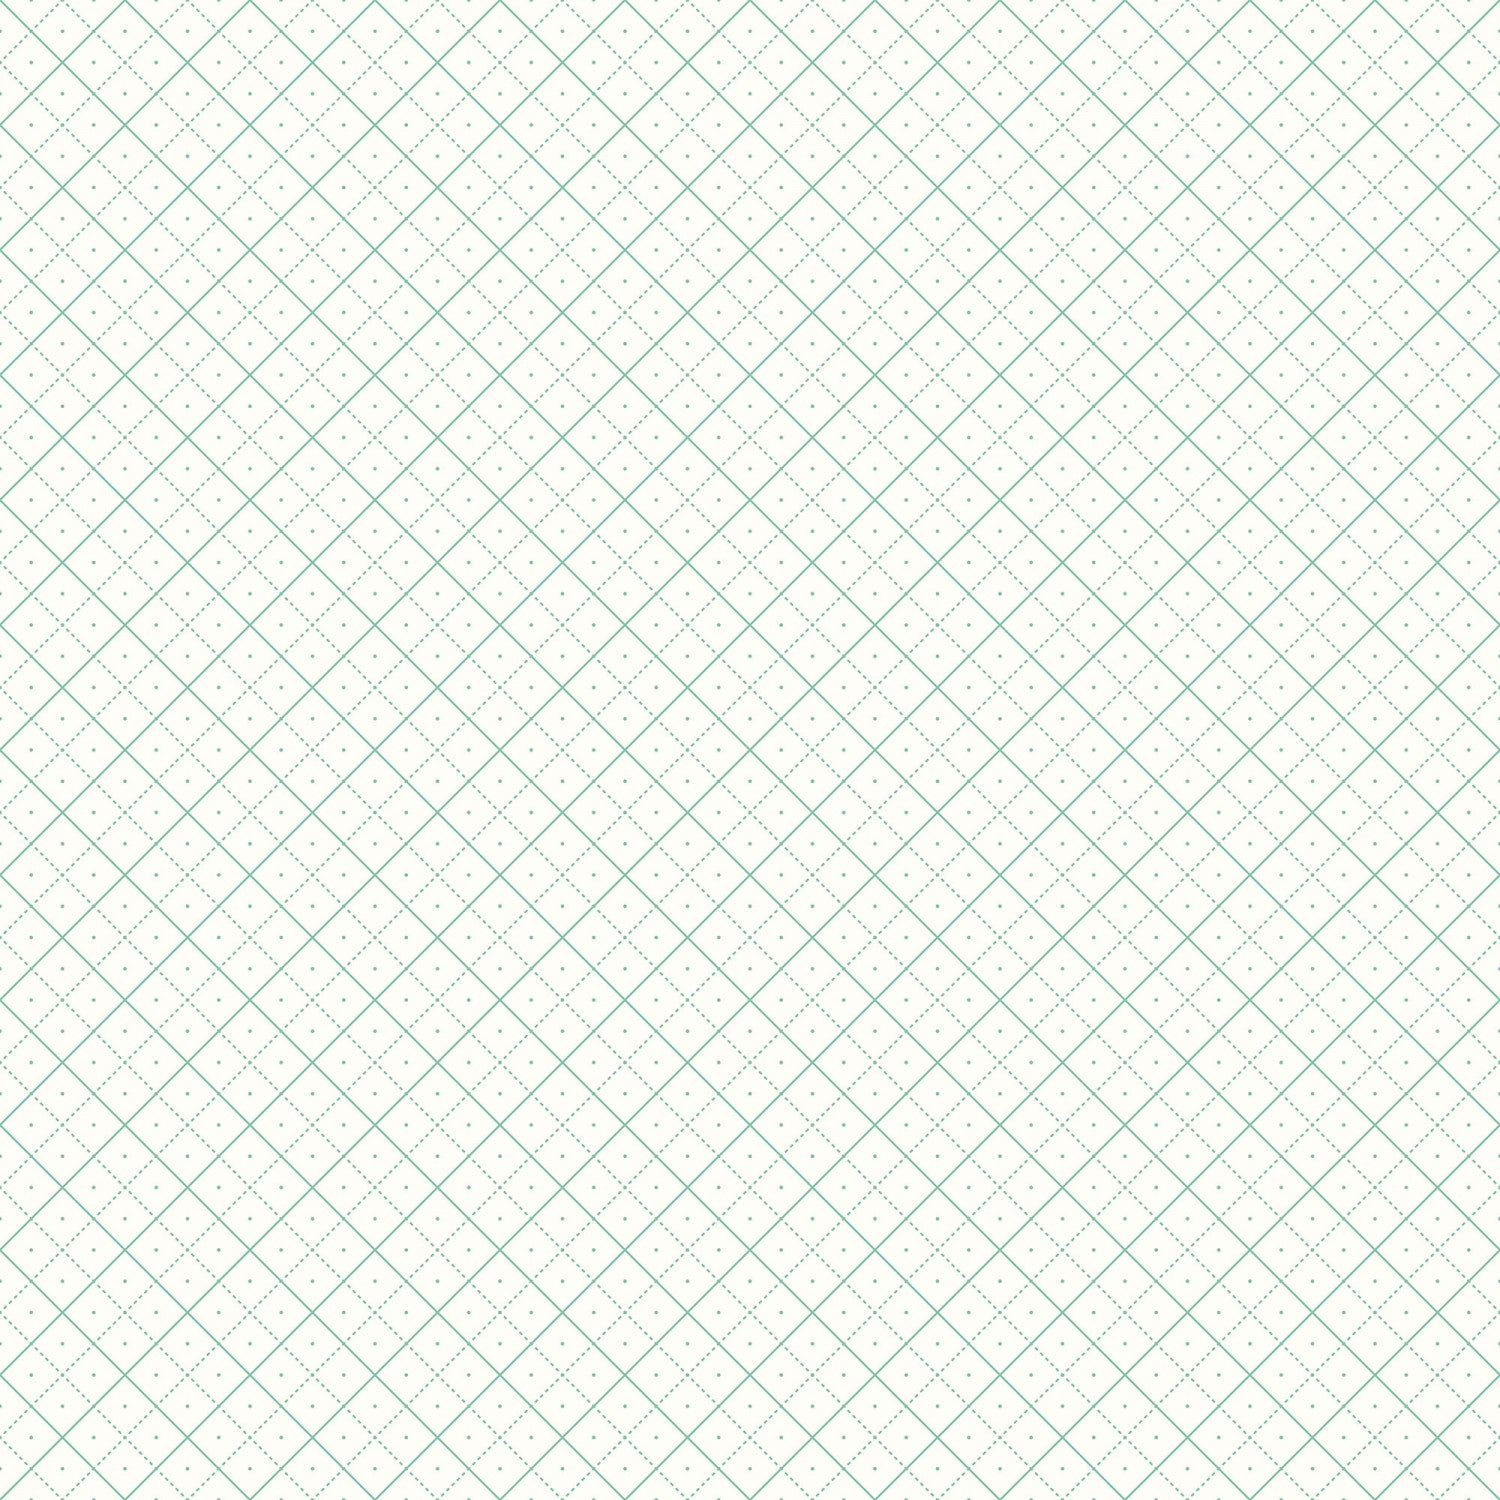 Bee Backgrounds - Grid - Teal